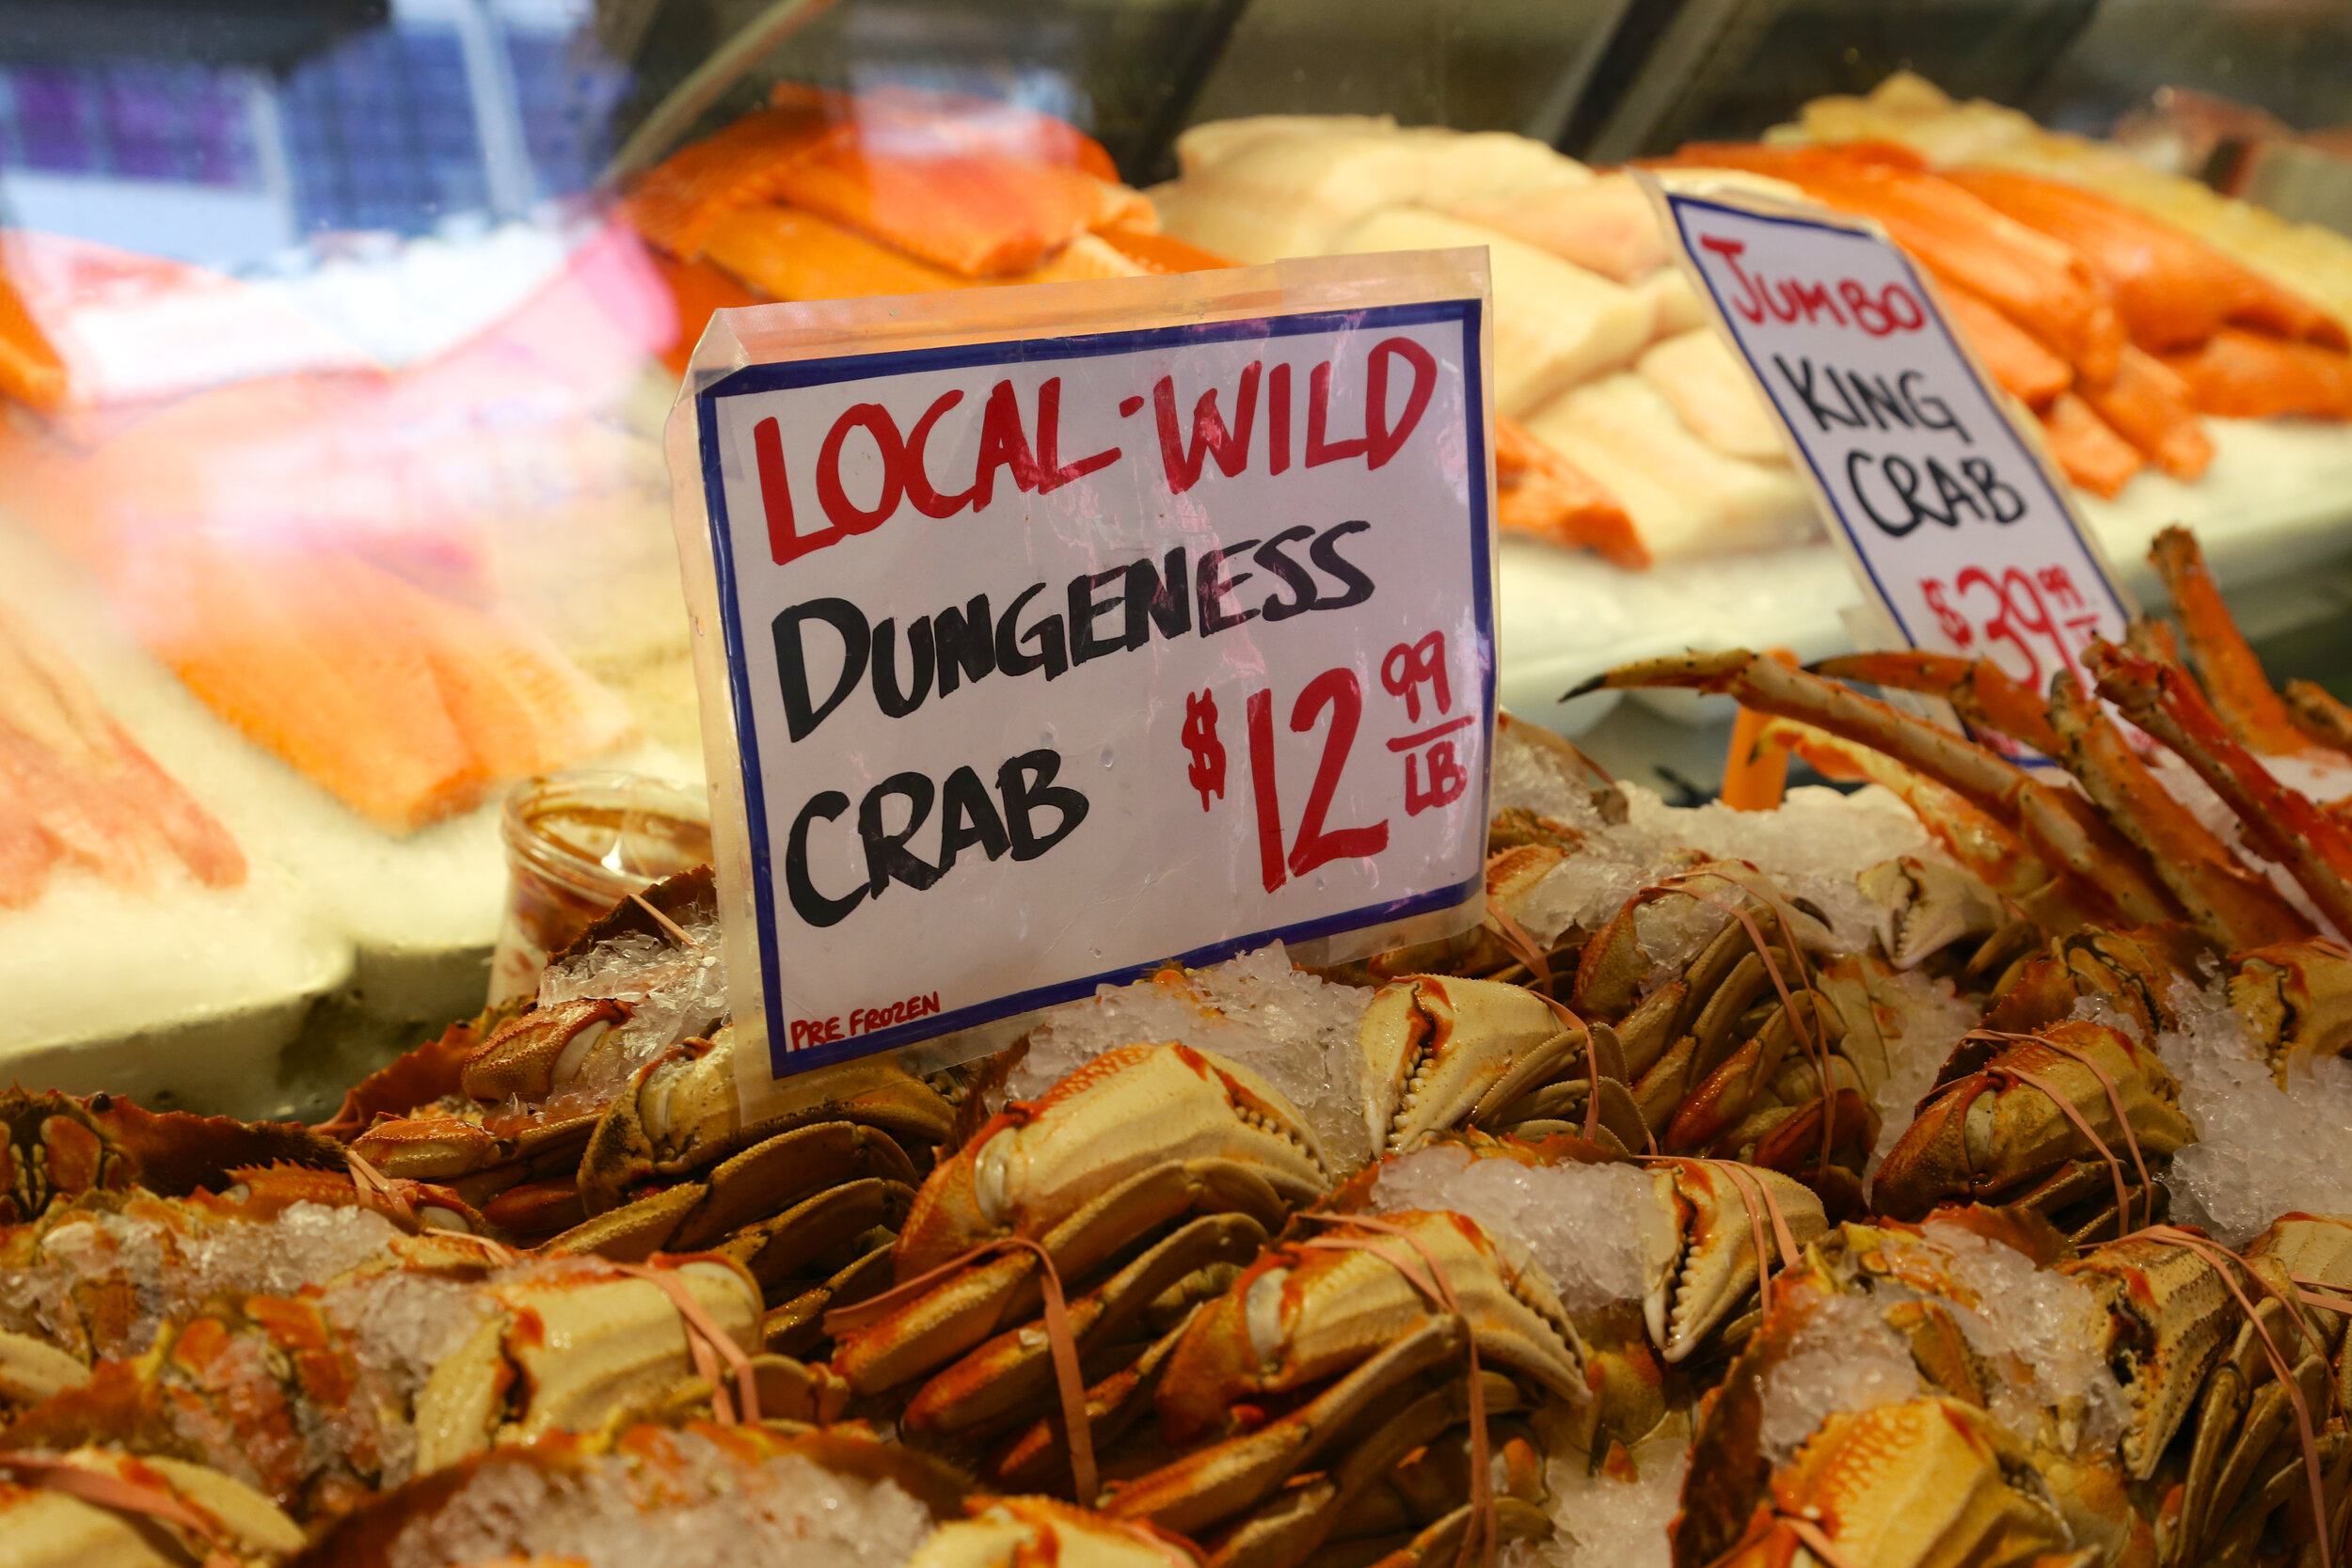 Crabs-for-sale-in-a-market-in-Seattle-869349392_5472x3648.jpeg